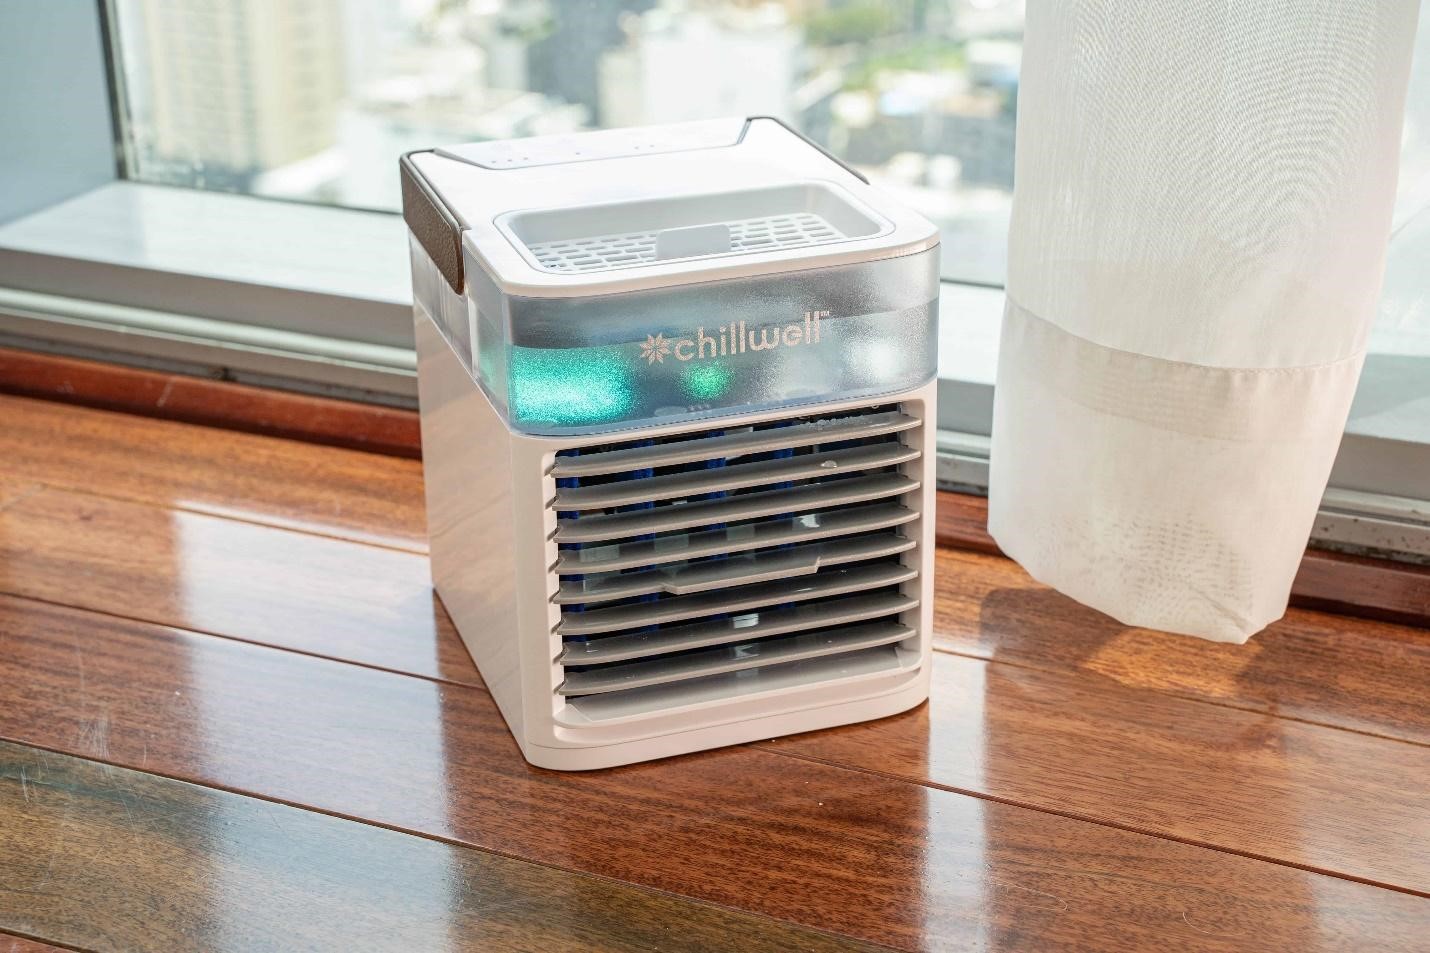 ChillWell Portable AC - Reviews, Uses, Price, Features, Benefits, Pros and Cons!